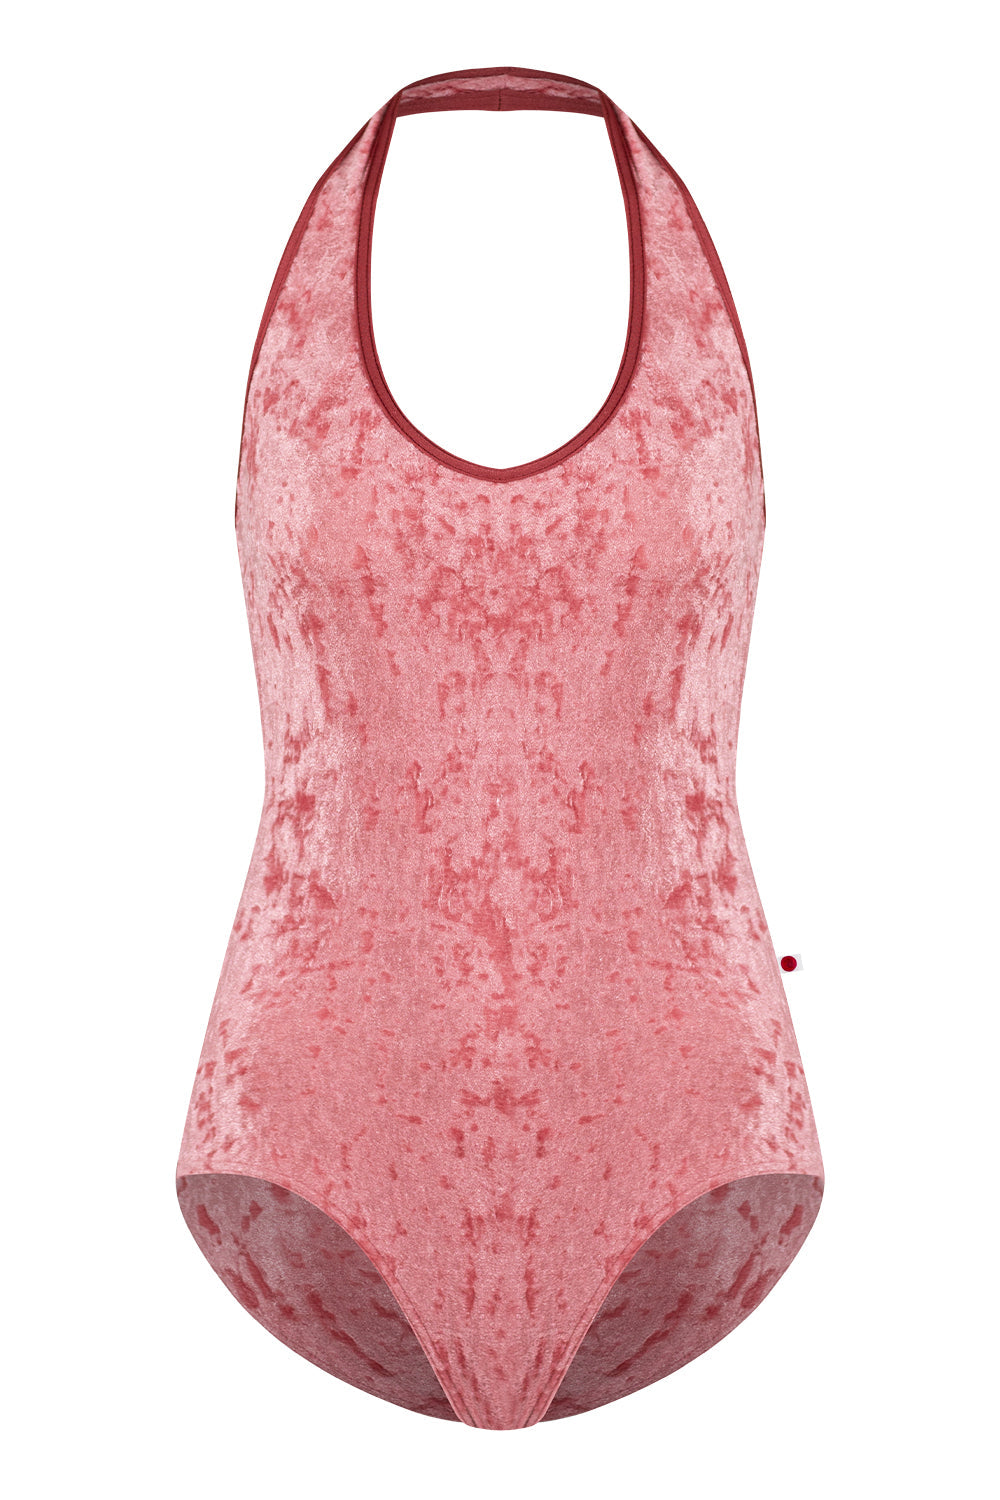 Jaione leotard in V-Romance body color with N-Fox trim color